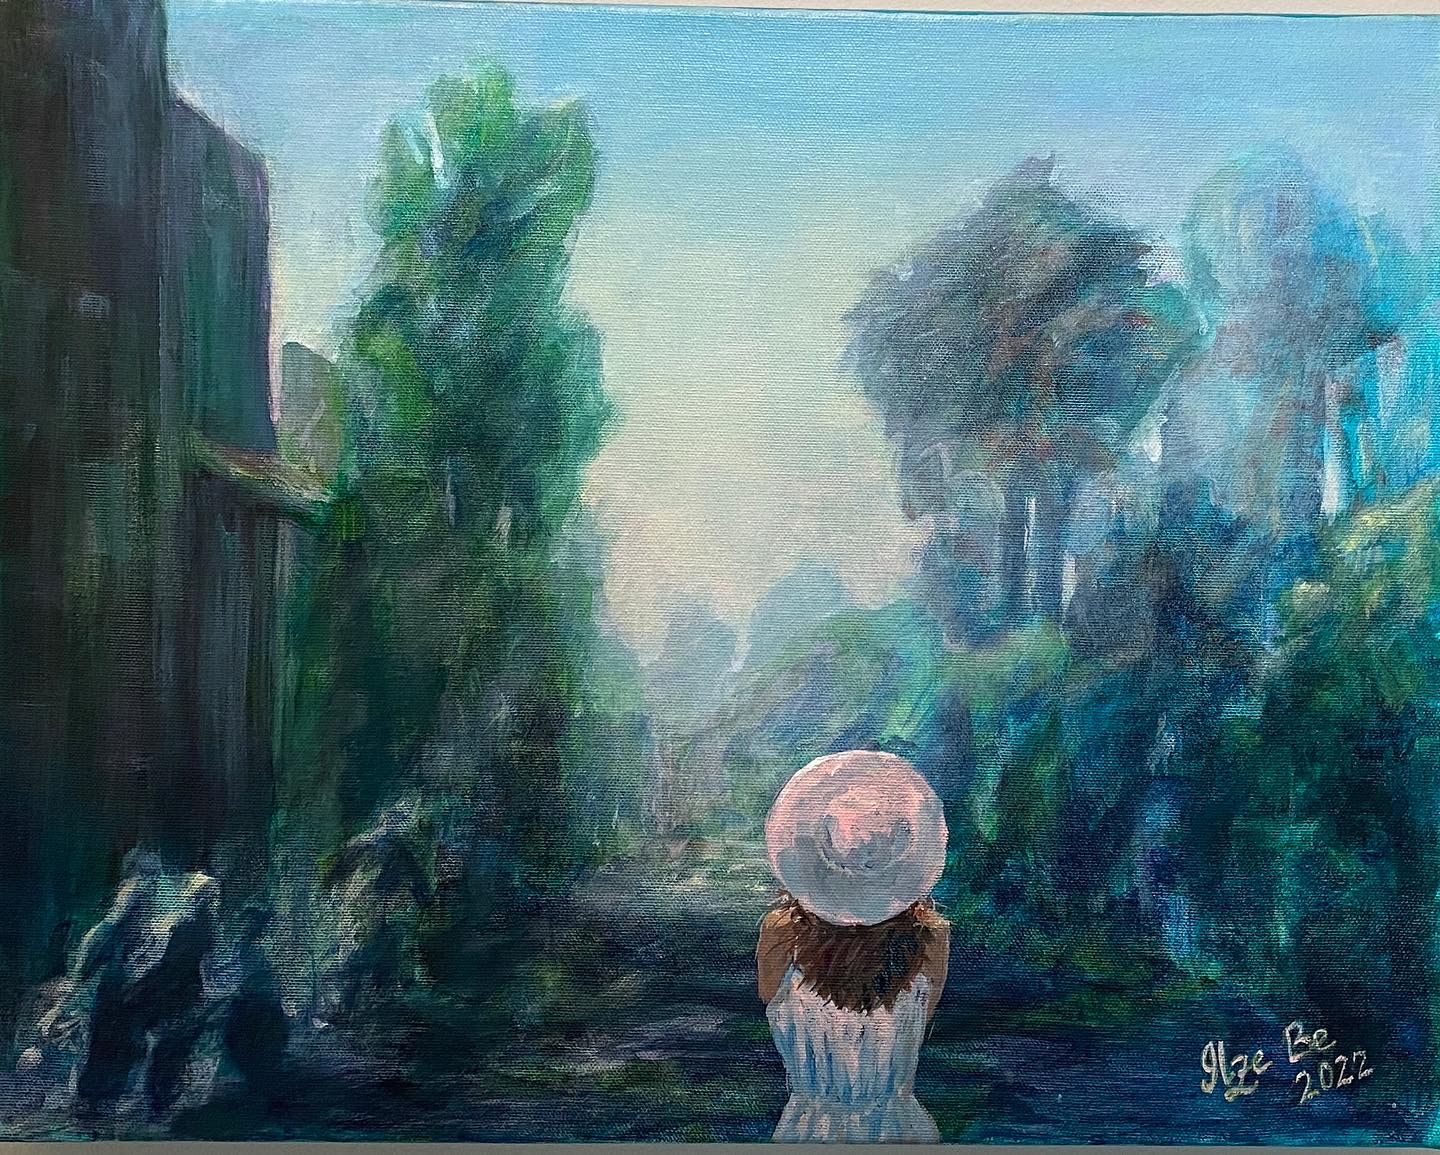 A painting with a shady street with a light female figure facing it in the foreground